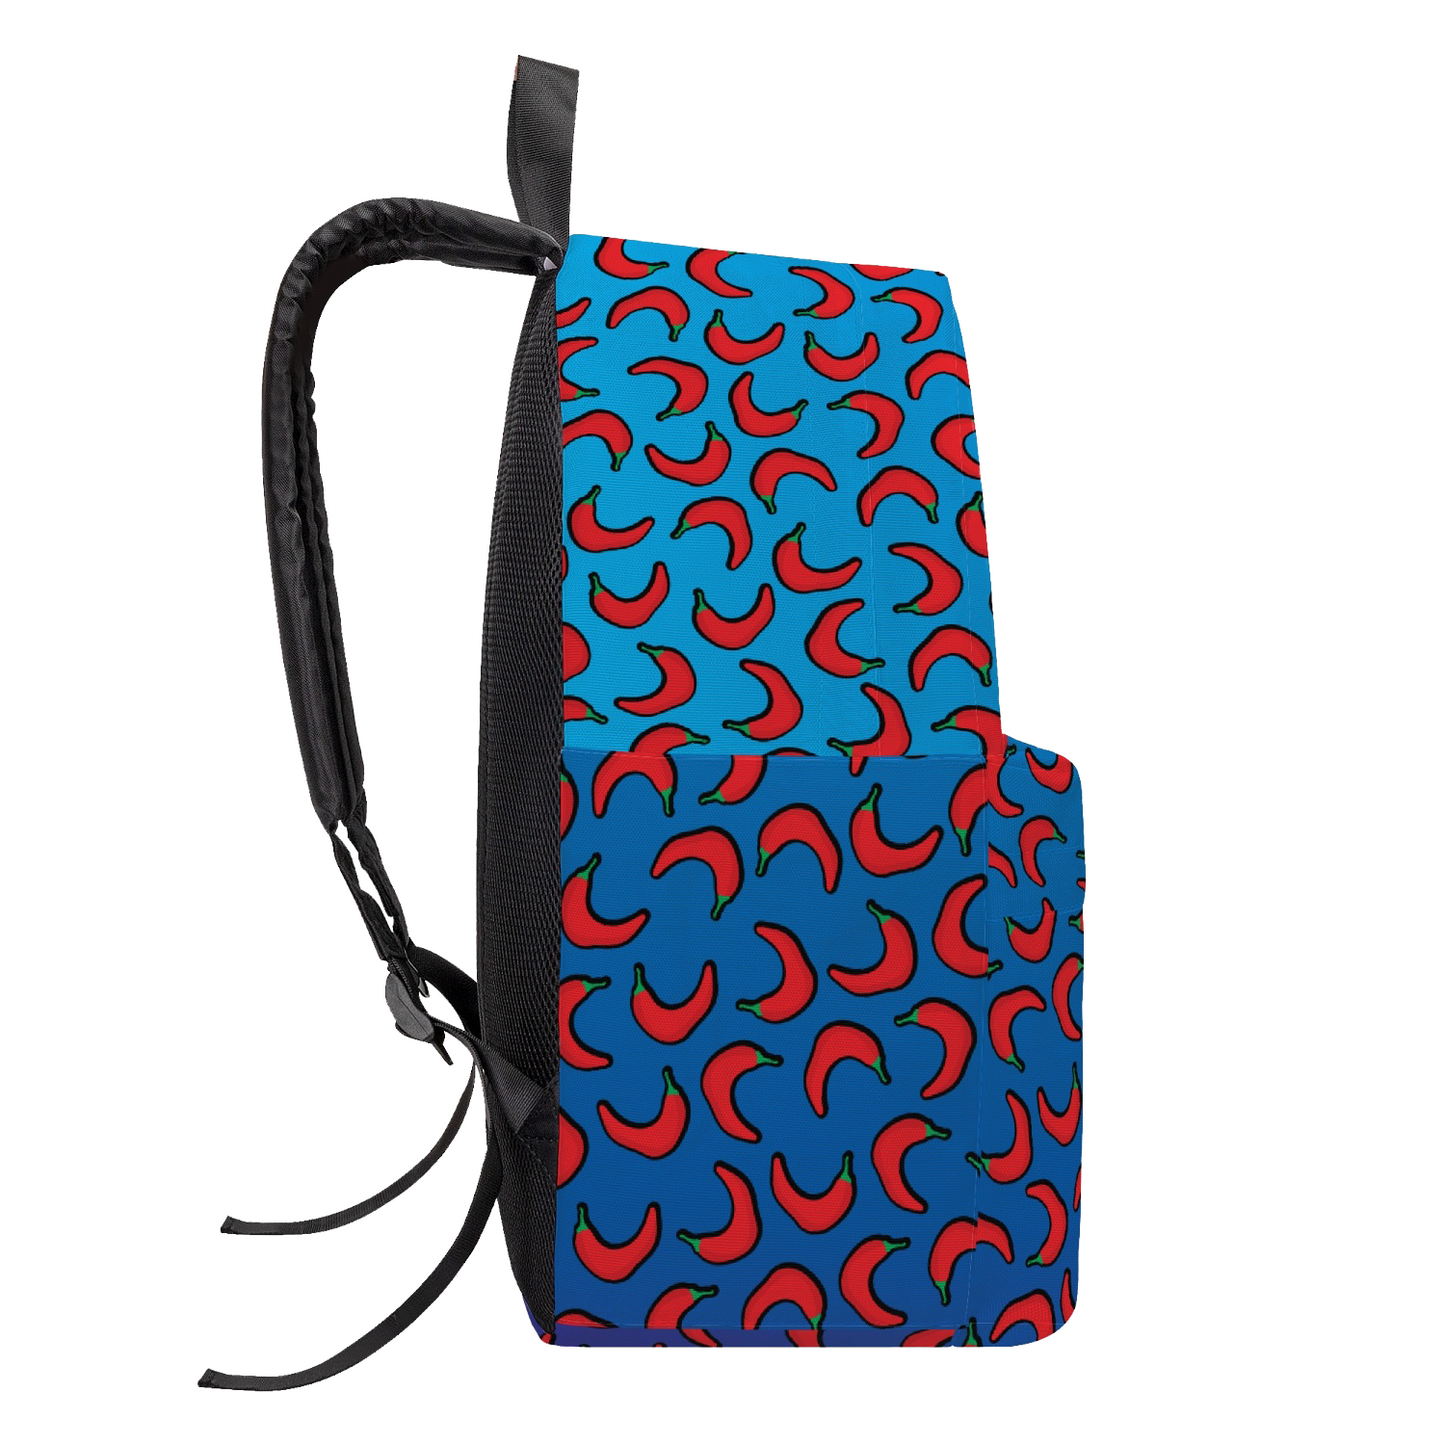 #WEIRDO | Awesome backpack for weird people! Are you a weirdo looking for weird stuff? Maybe you like this backpack! This blue backpack with striking red peppers makes you stand out! Not only the colours, but also the Extremely Hot Weirdo fun meme makes you stand out!